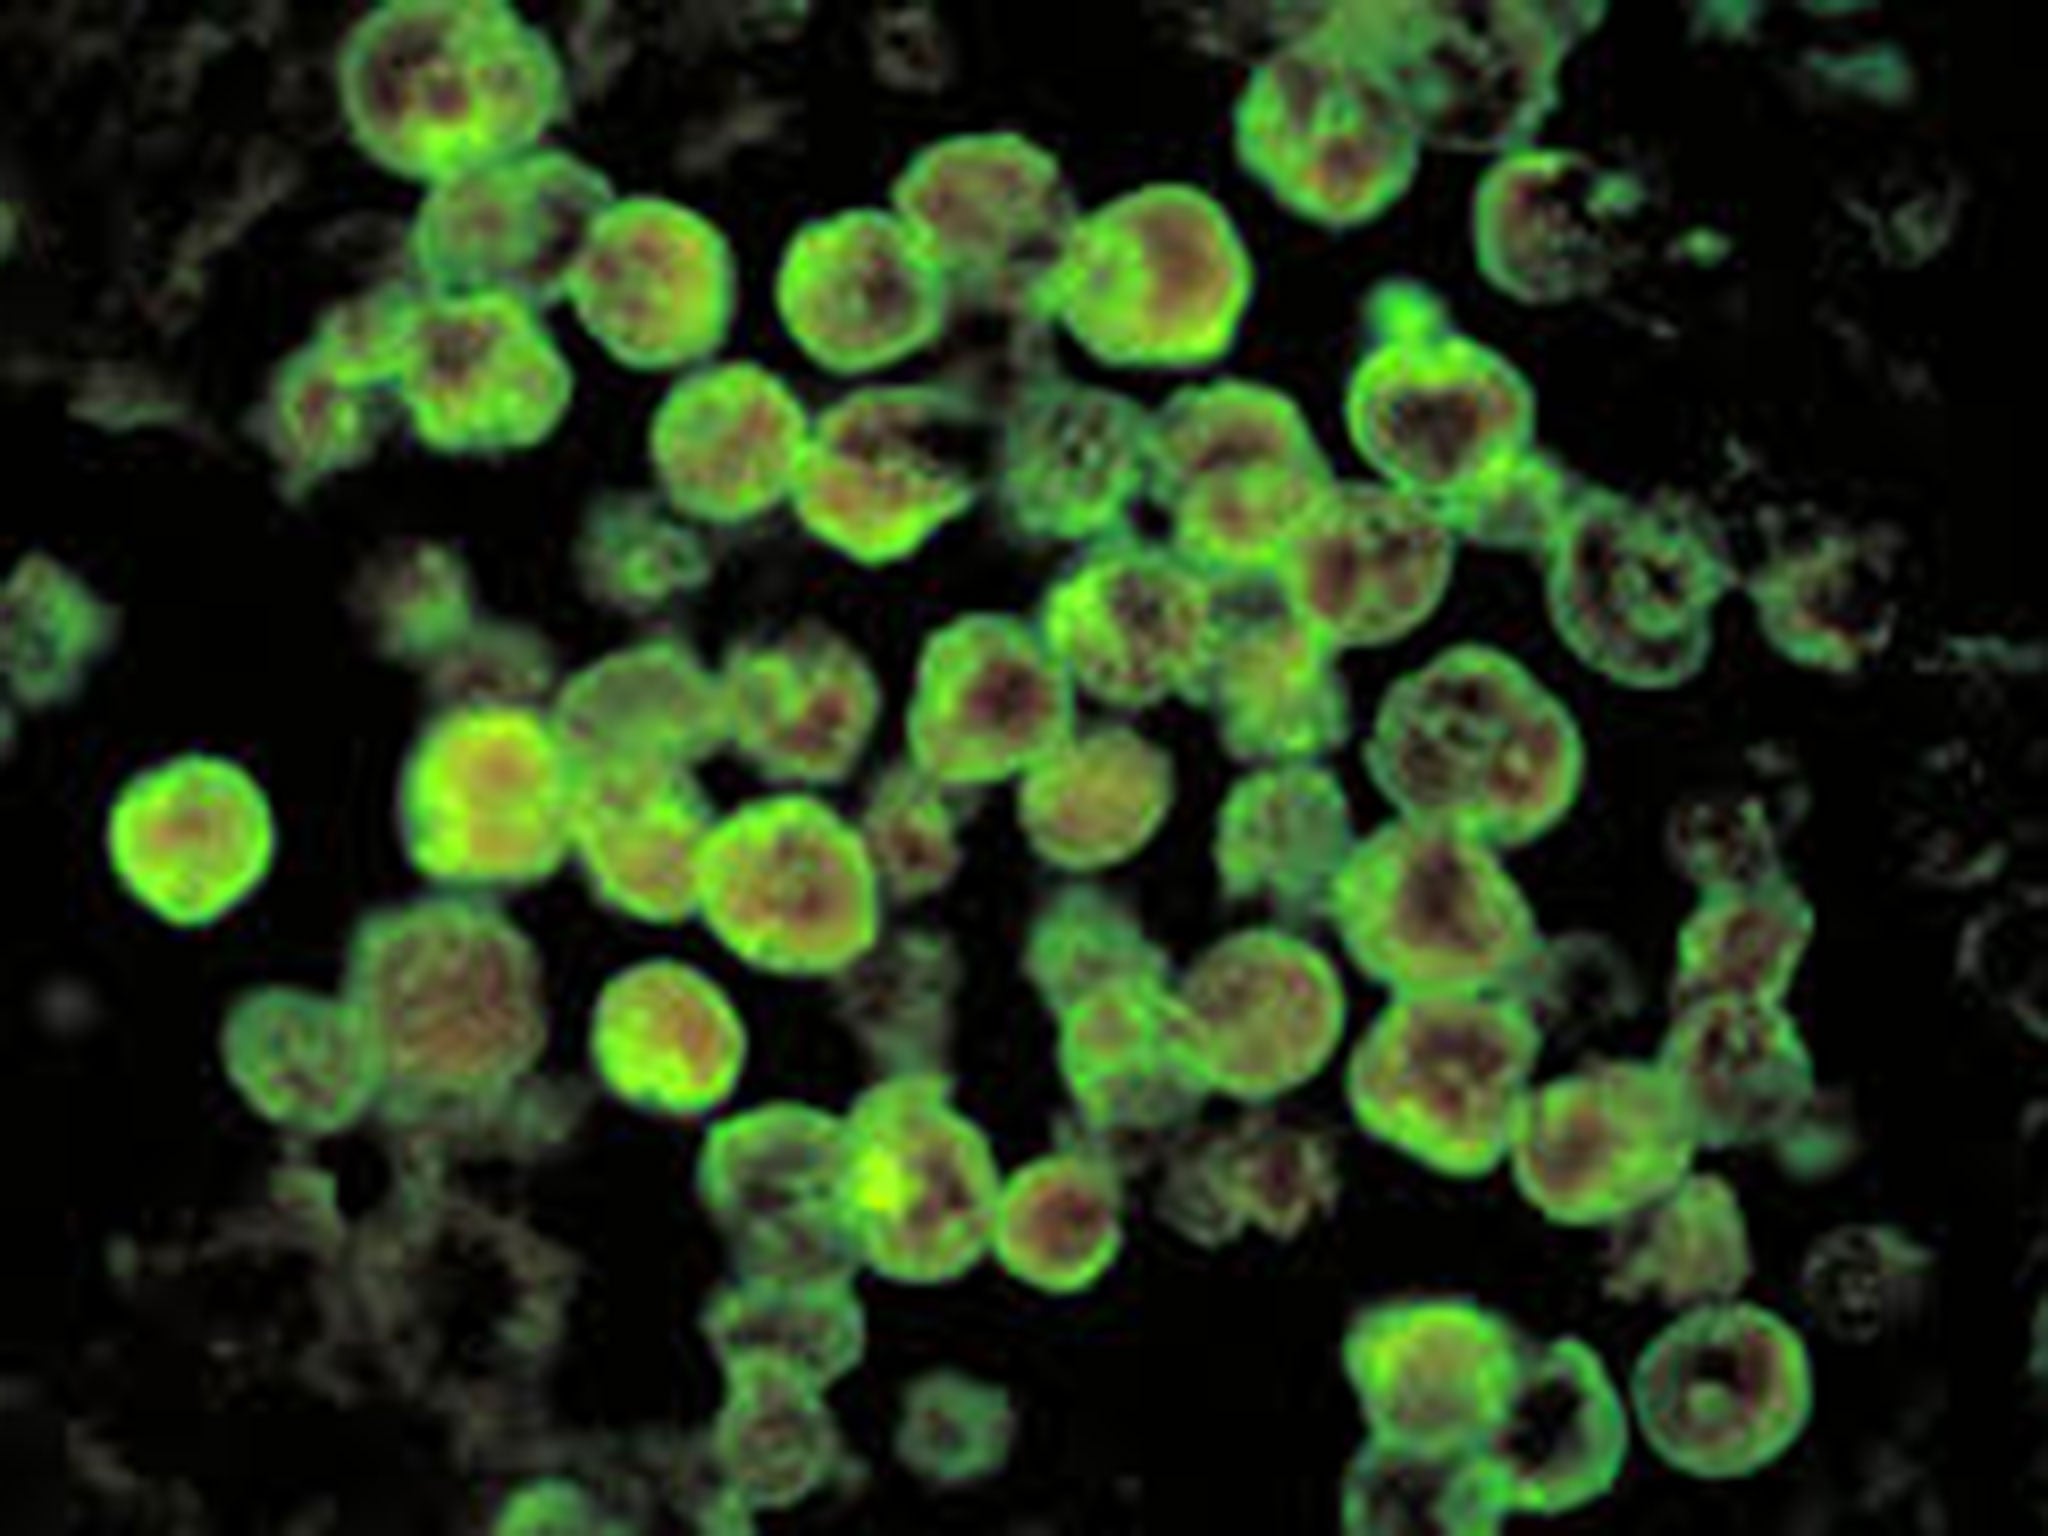 The Naegleria fowleri bug was discovered during standard testing by the Louisiana Department of Health and Hospitals (DHH) in a water system used by 12,577 people